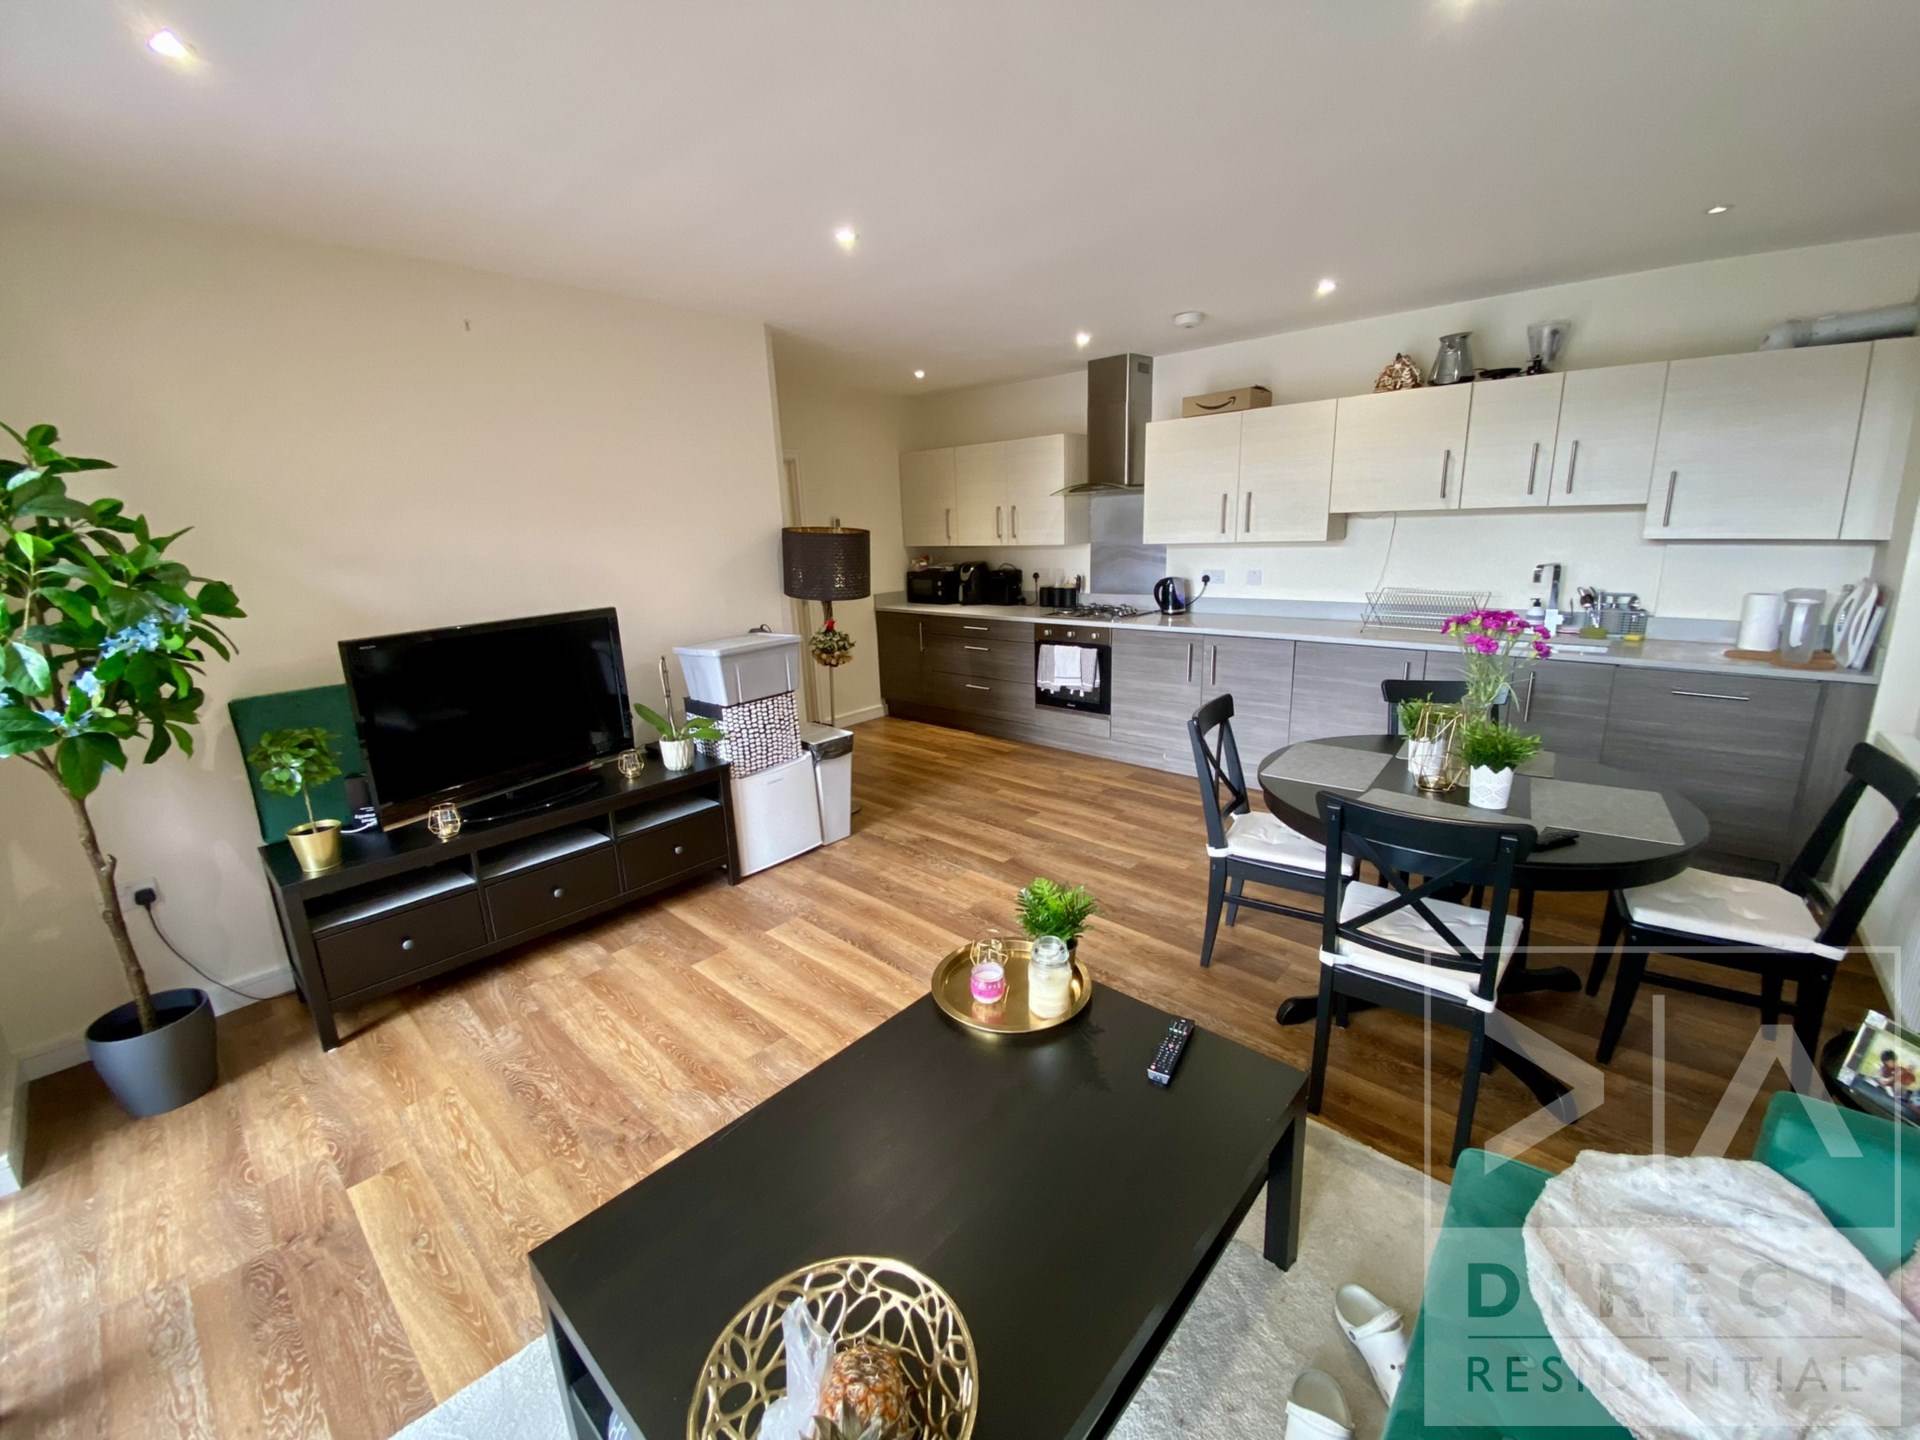 2 bed Apartment for rent in Epsom. From Direct Residential - Epsom